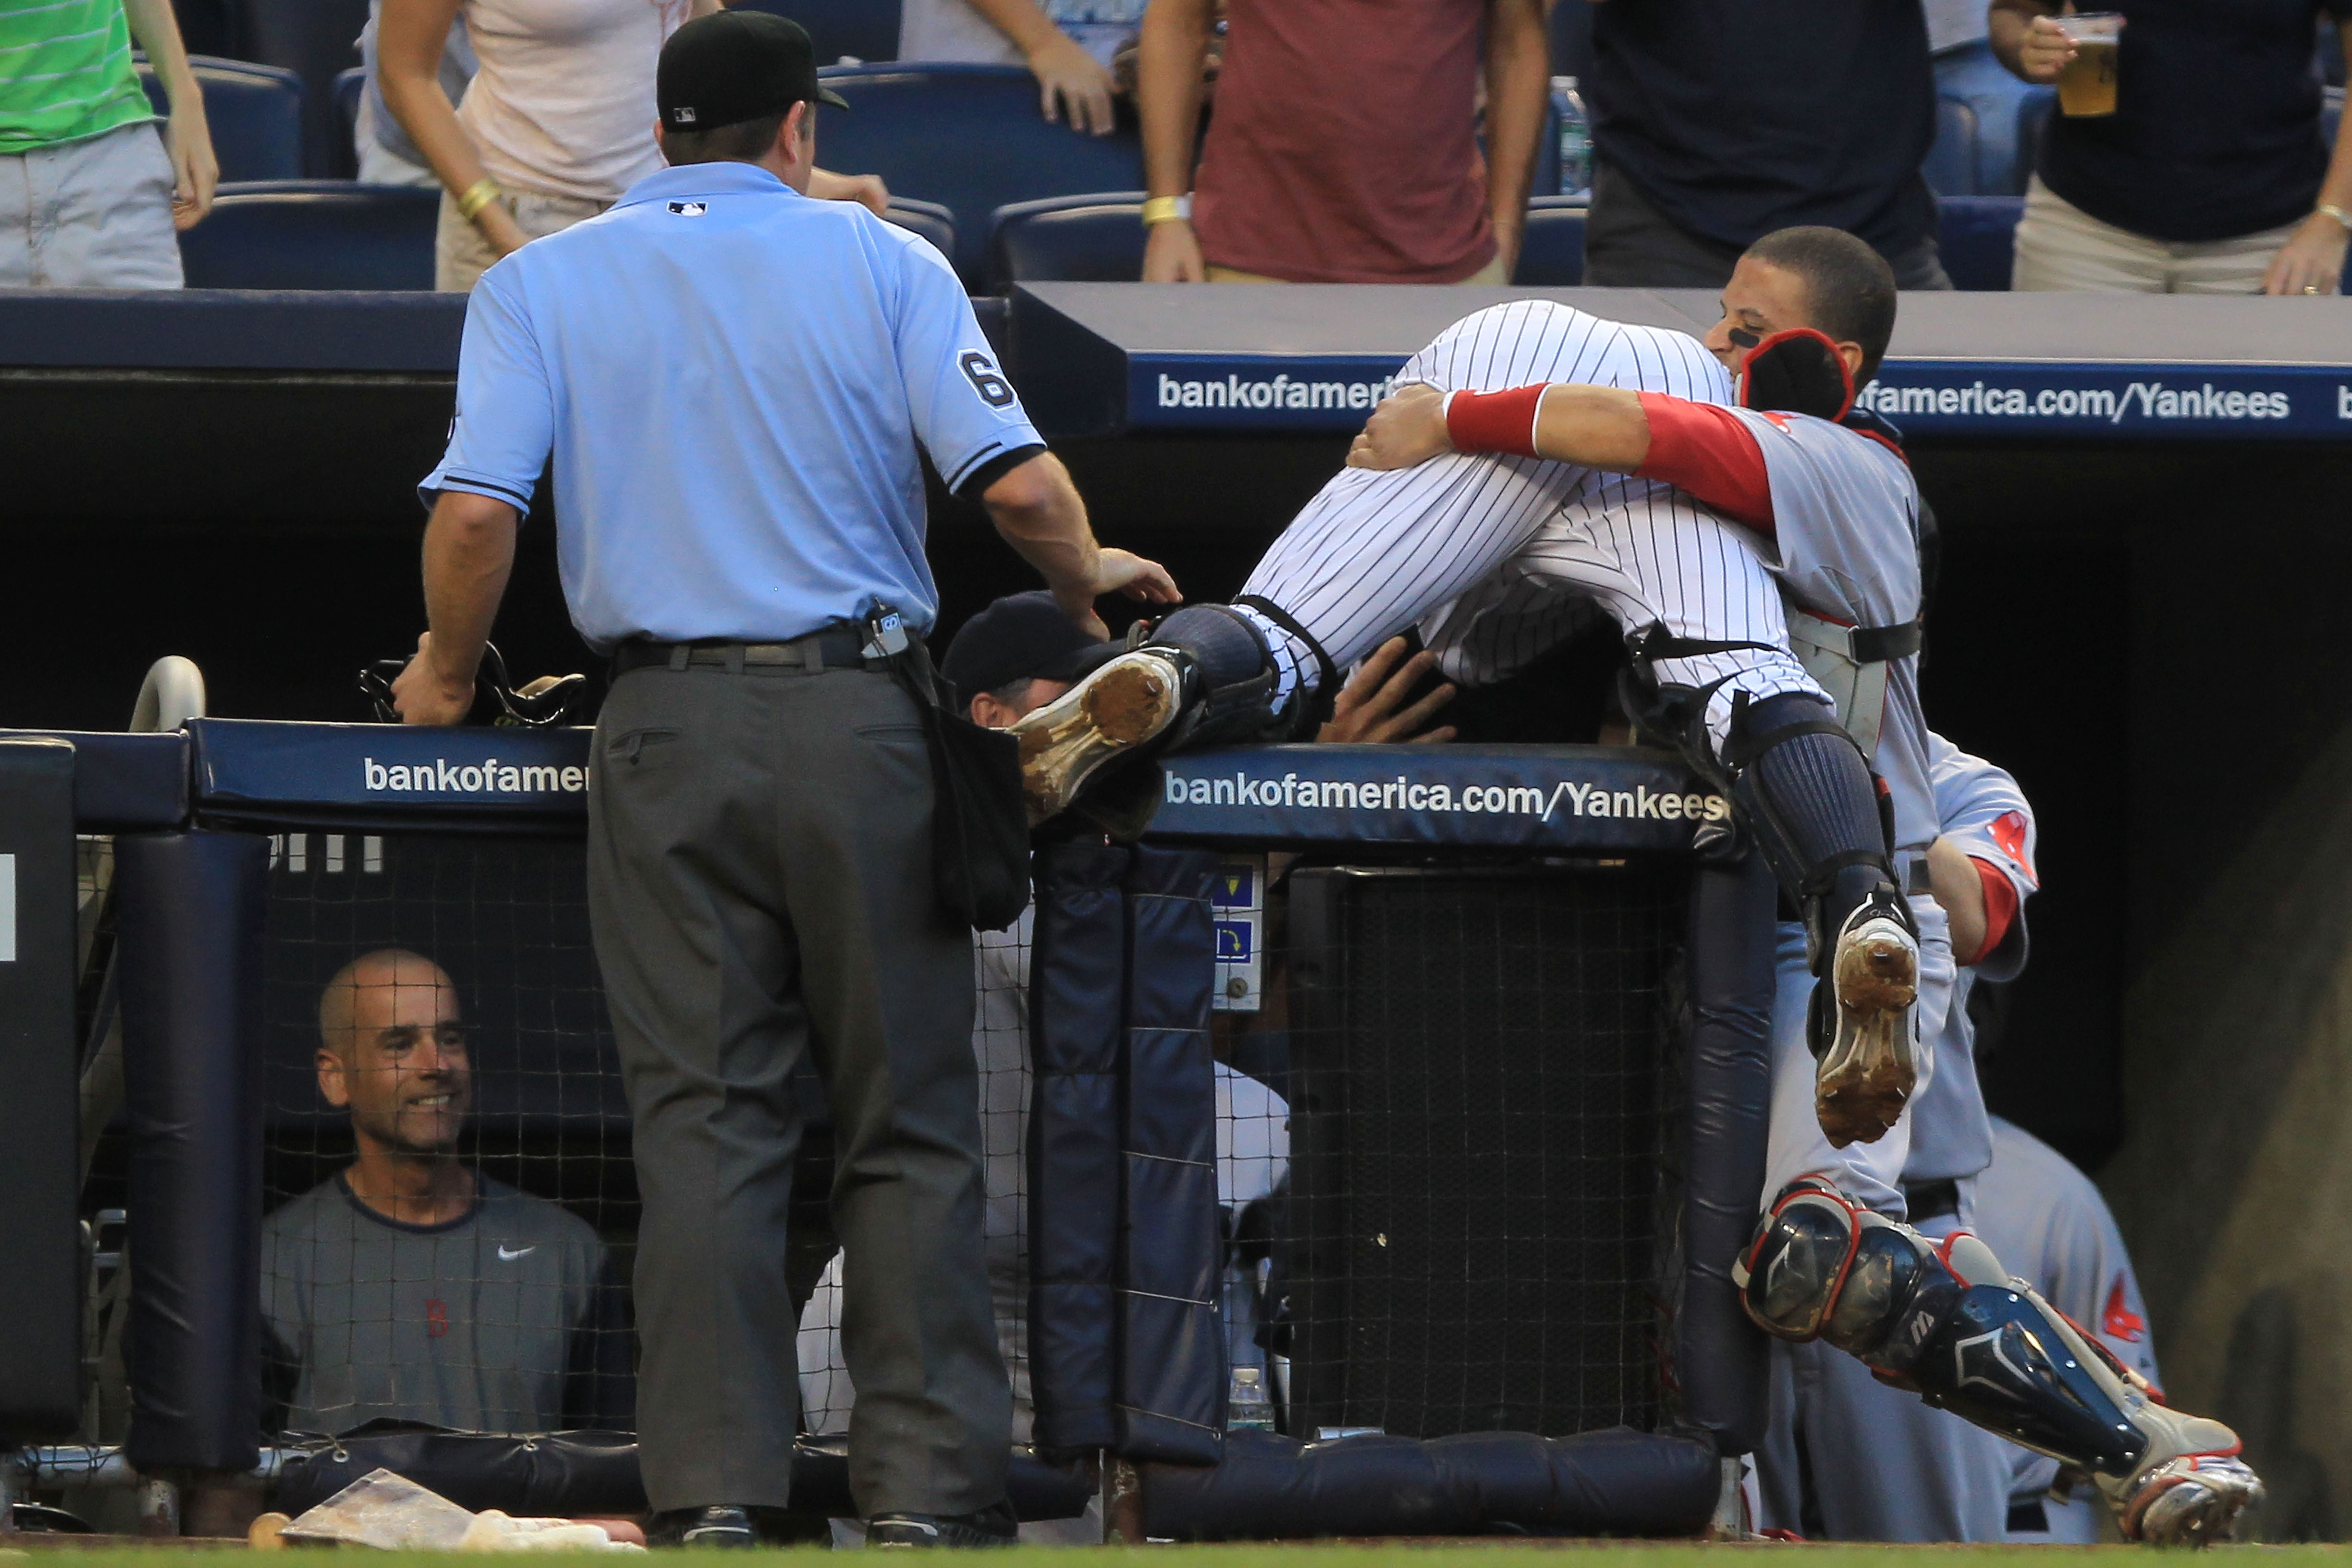 NEW YORK - SEPTEMBER 25:  Francisco Cervelli #29 of the New York Yankees is helped by Victor Martinez #41 of the Boston Red Sox after falling over the Red Sox dugout wall trying to catch a foul ball during their game on September 25, 2010 at Yankee Stadiu